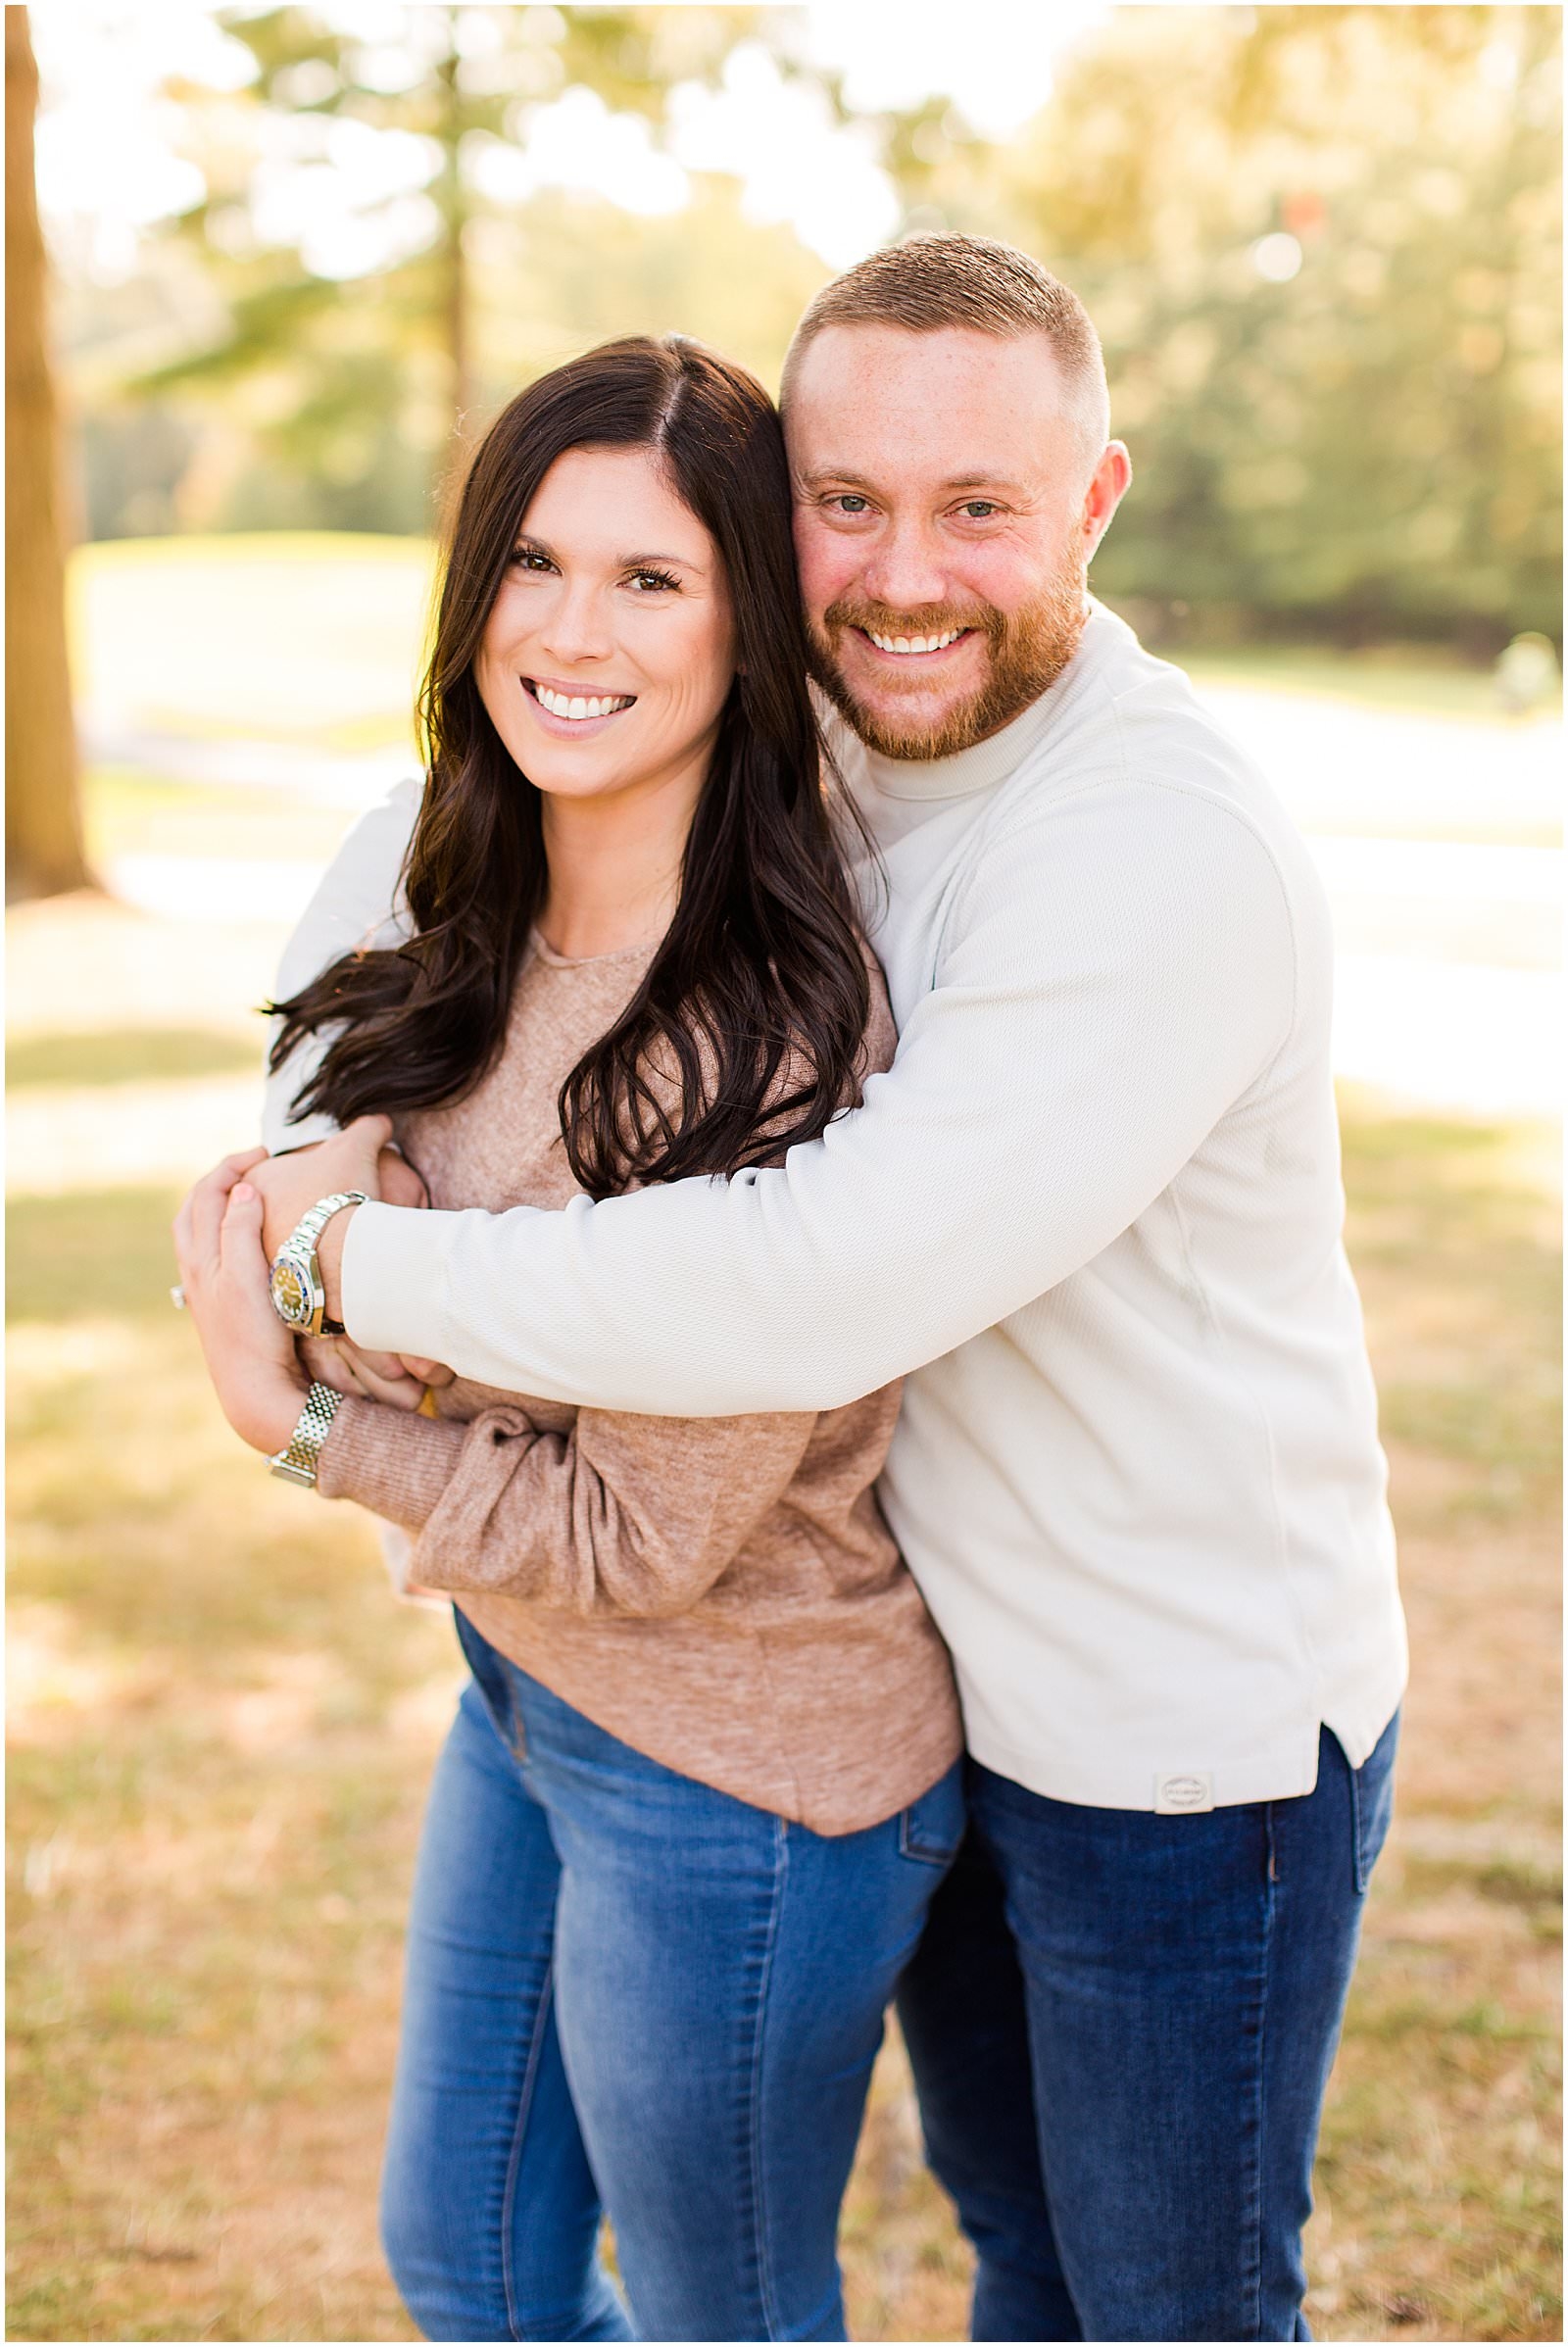 A Rolling Hills Country Club Engagement Session | Meagan and Kyle | Bret and Brandie Photography 0008.jpg